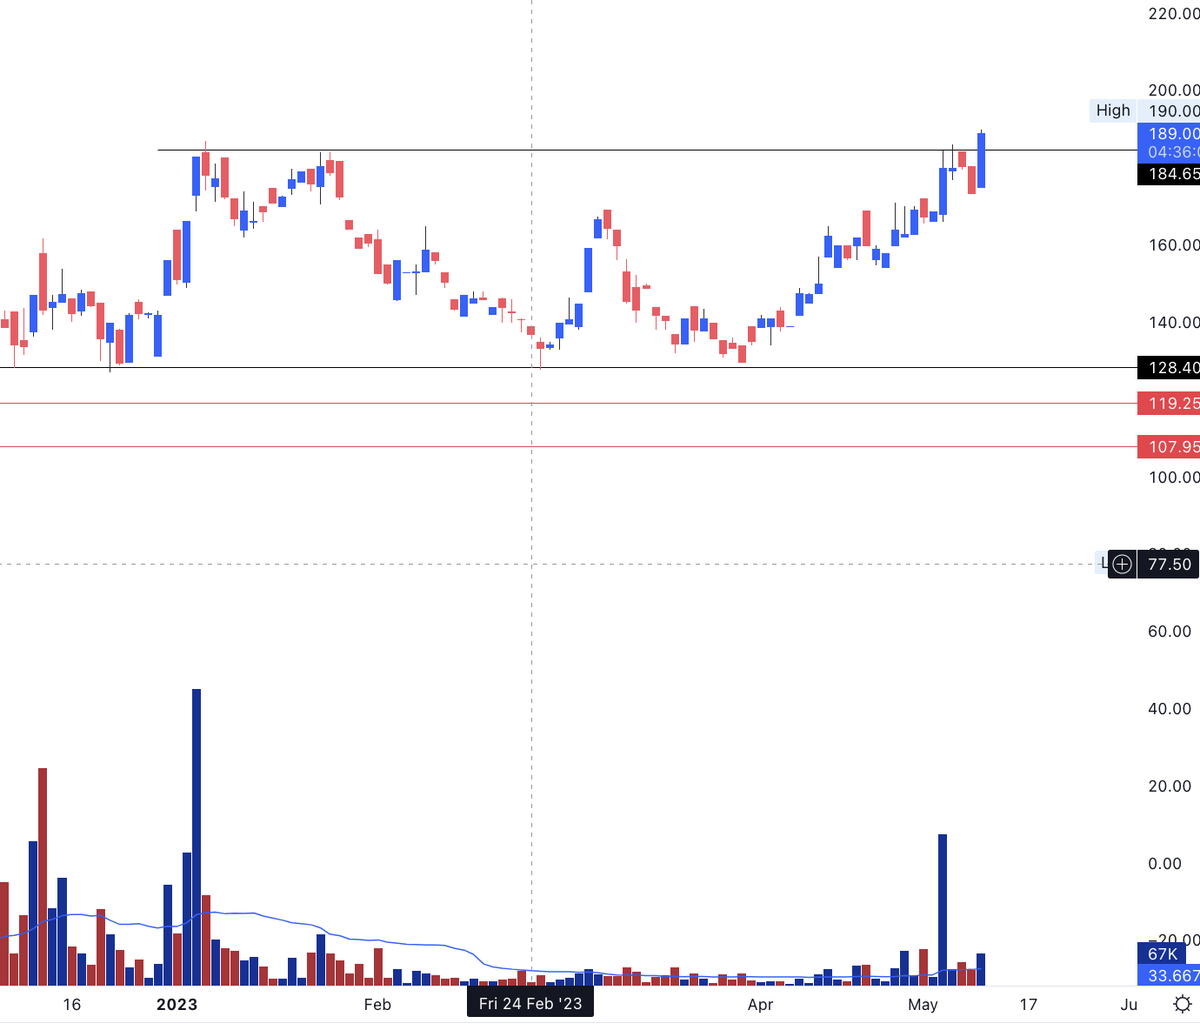 #KrishnaDefence 

Breaking out of Consolidation!

keeping a close watch, BOYS!